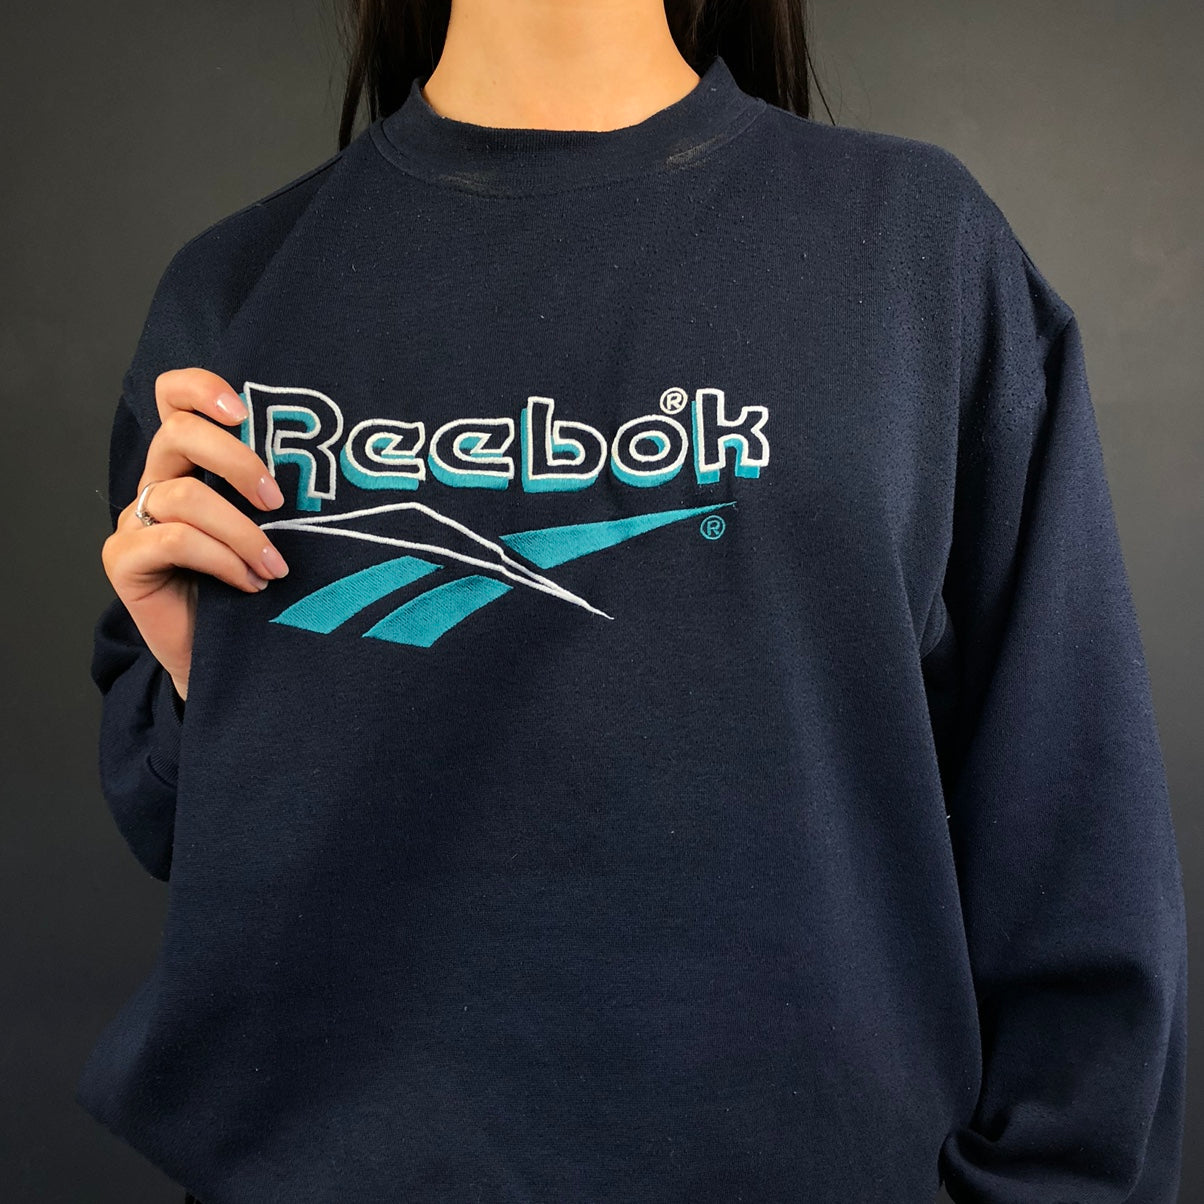 Vintage Reebok Spellout Sweatshirt with Embroidered Spellout & Logo